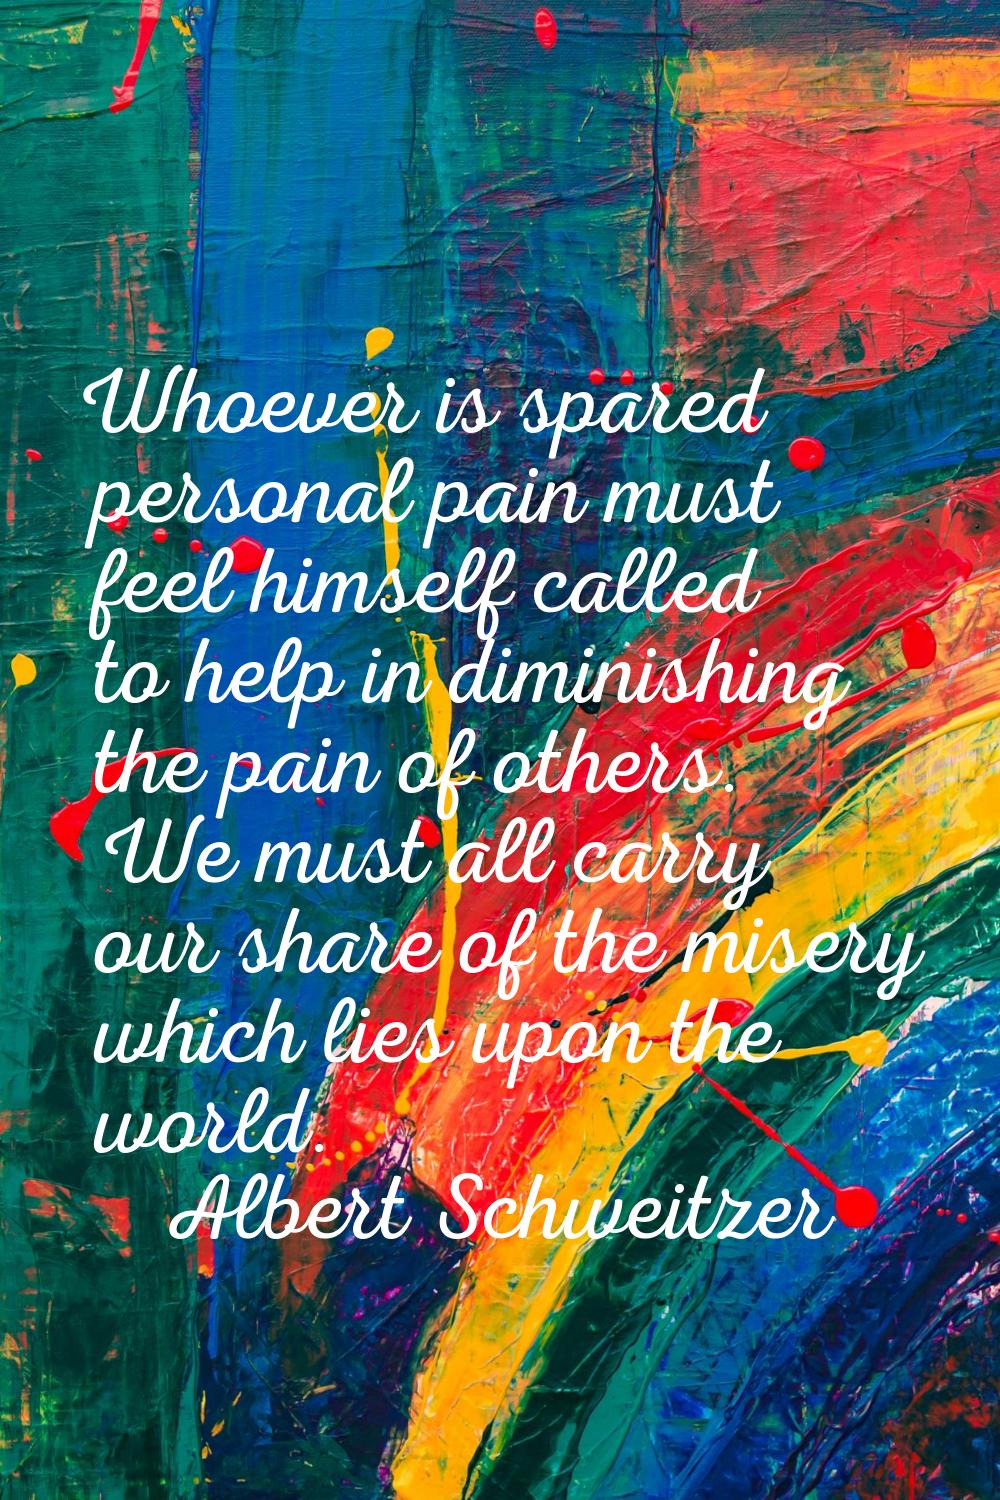 Whoever is spared personal pain must feel himself called to help in diminishing the pain of others.